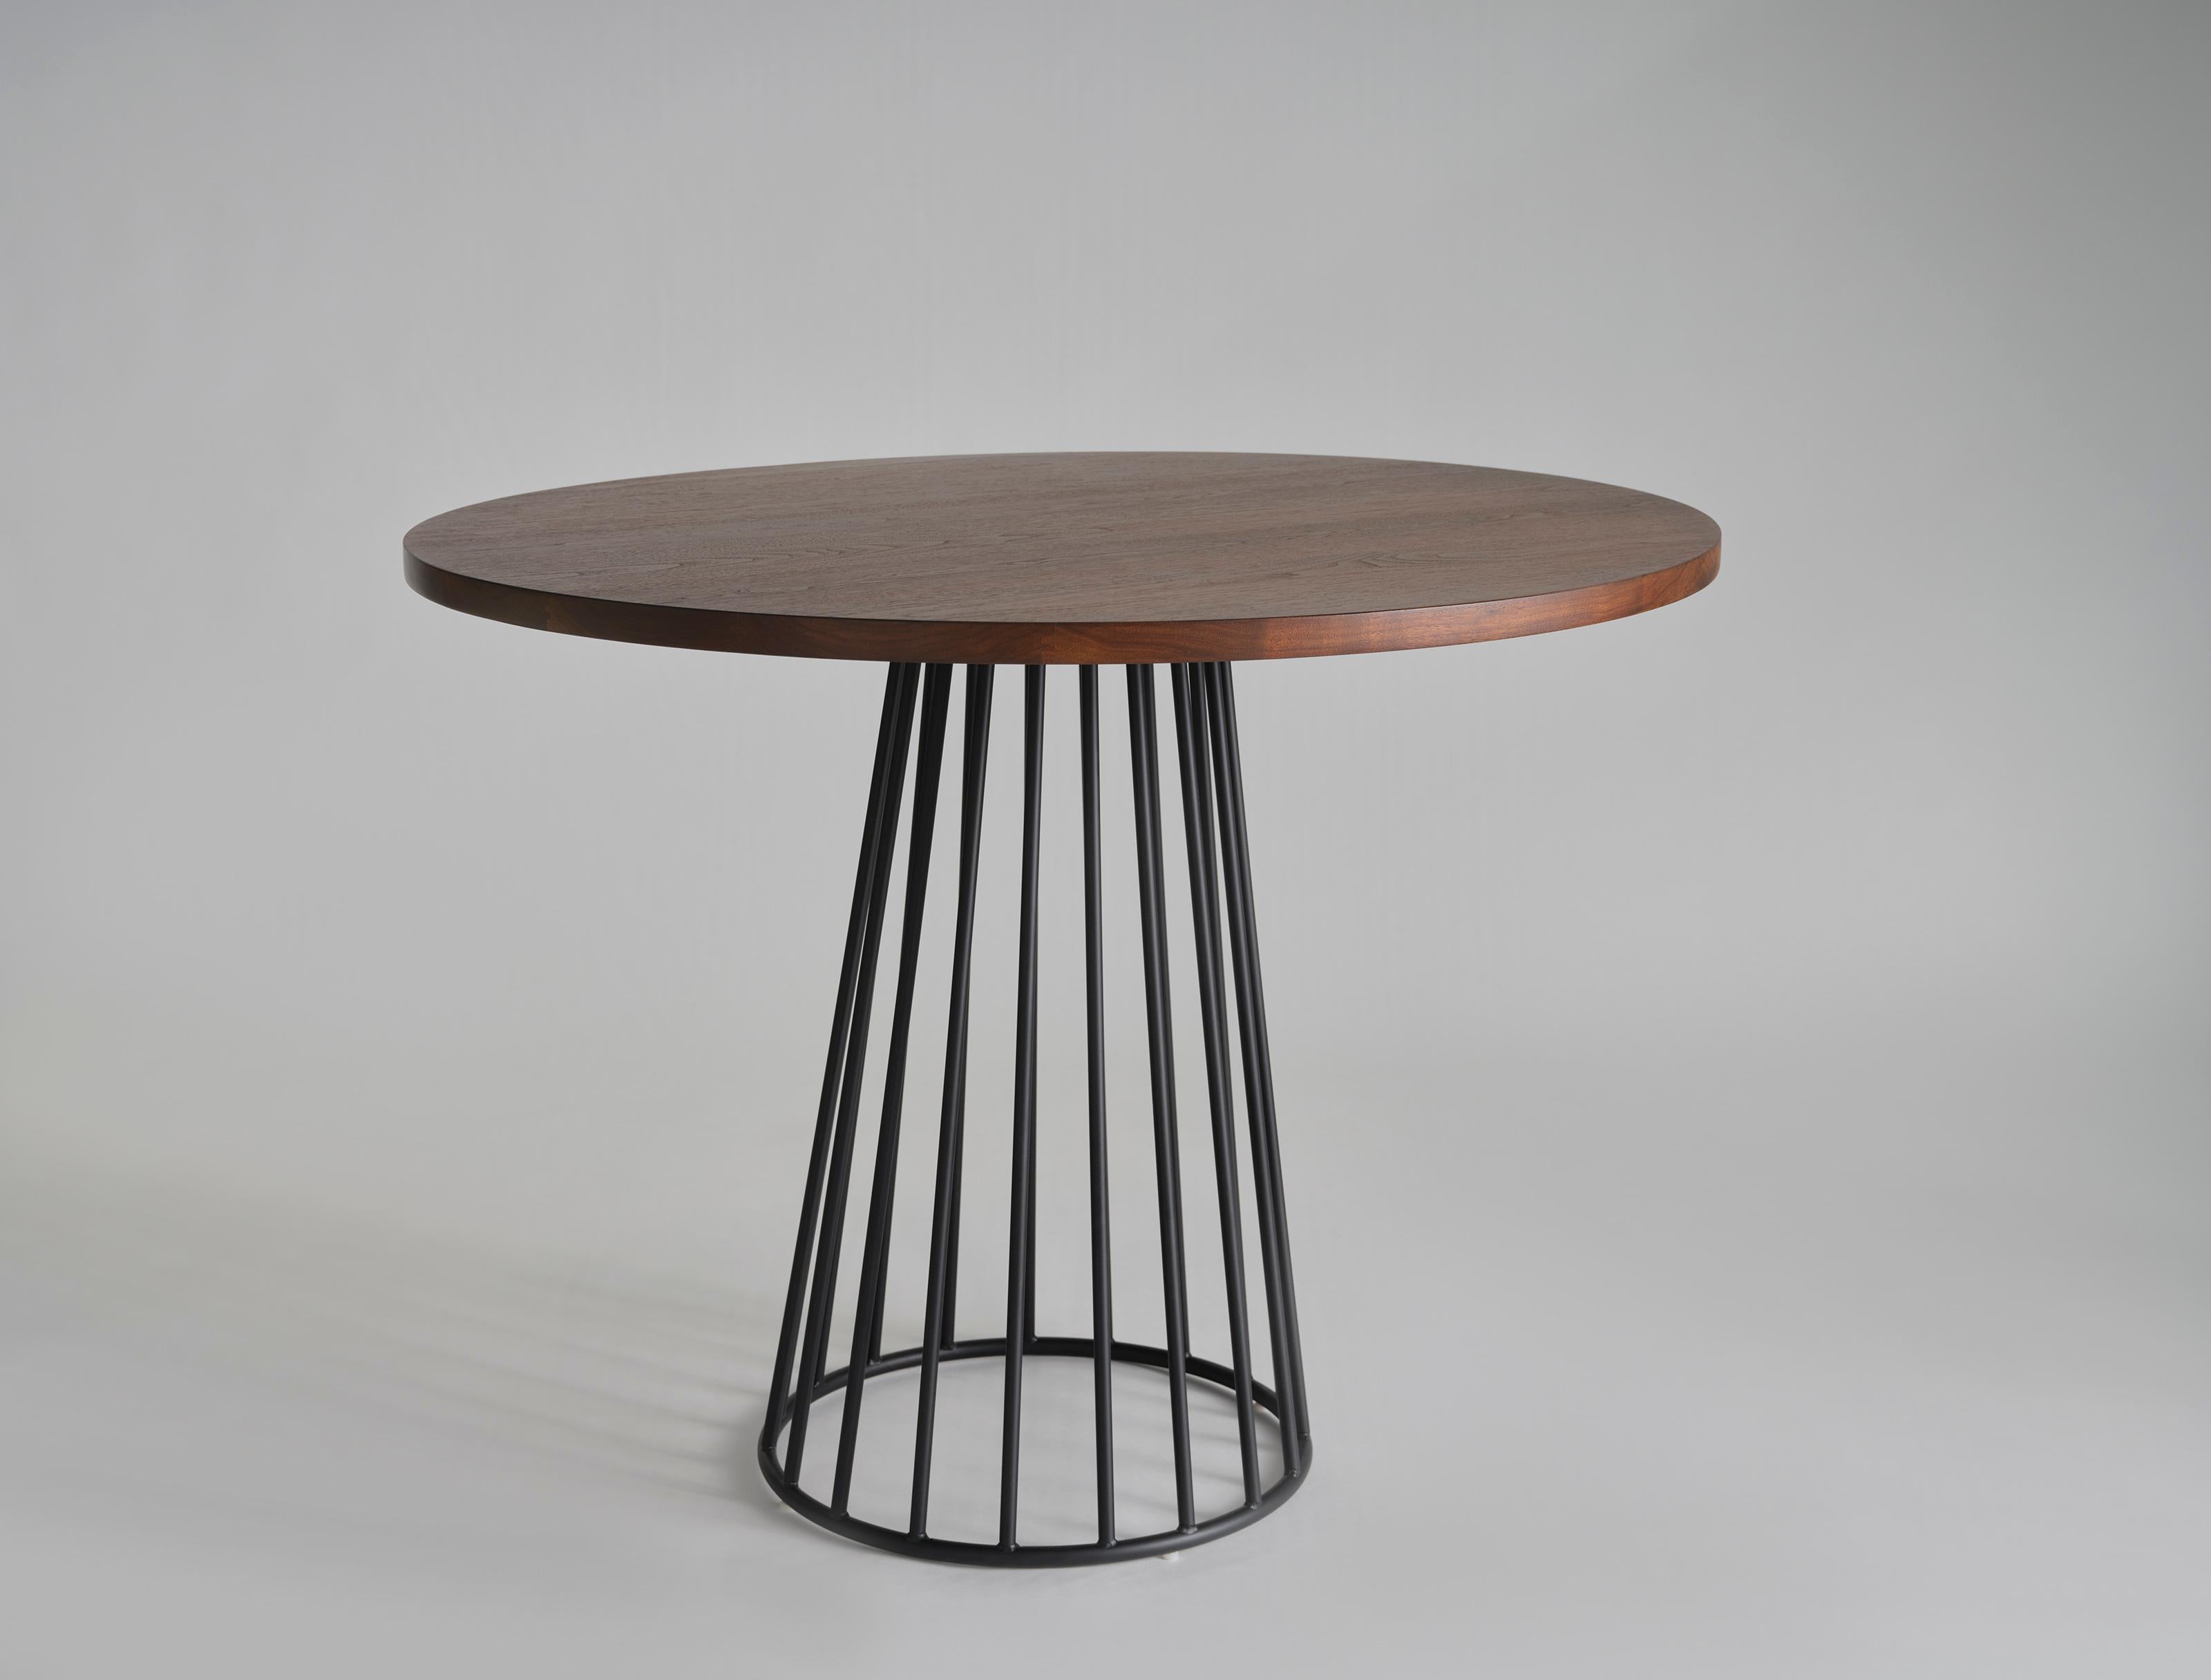 American Wired Café Table by Phase Design For Sale